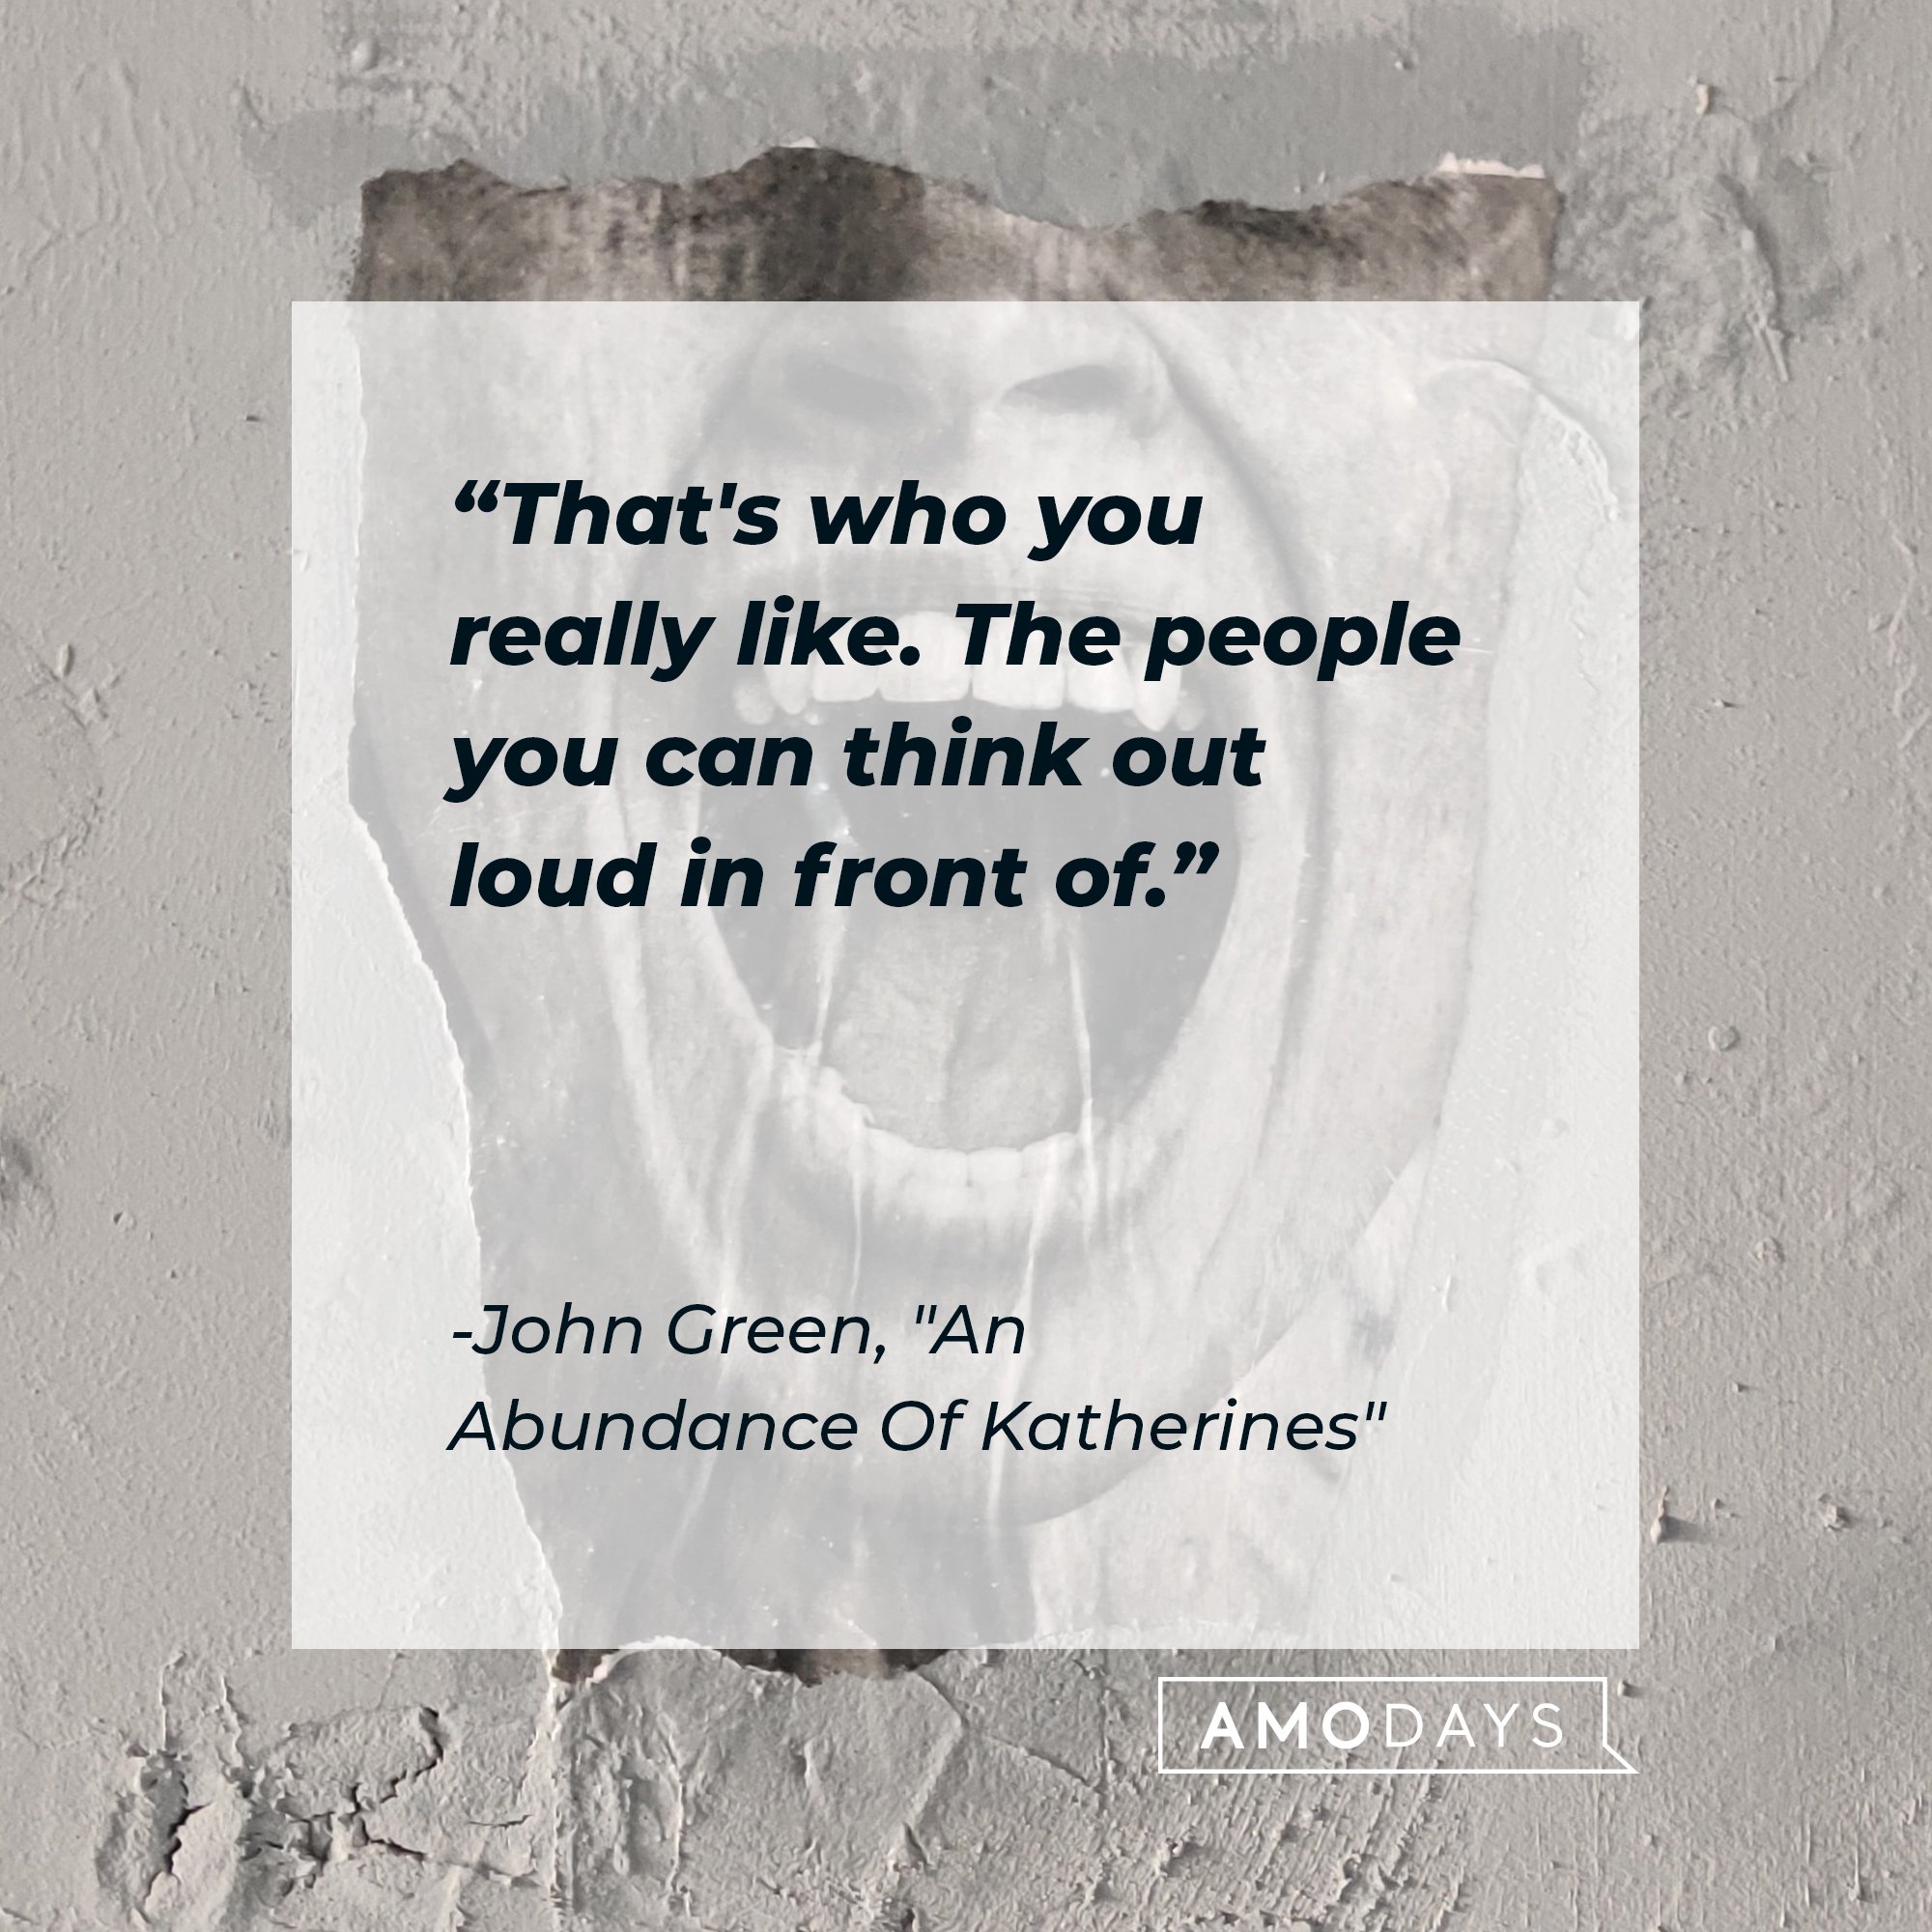 John Green’s quote from “An Abundance Of Katherines": "That's who you really like. The people you can think out loud in front of." | Image: AmoDays